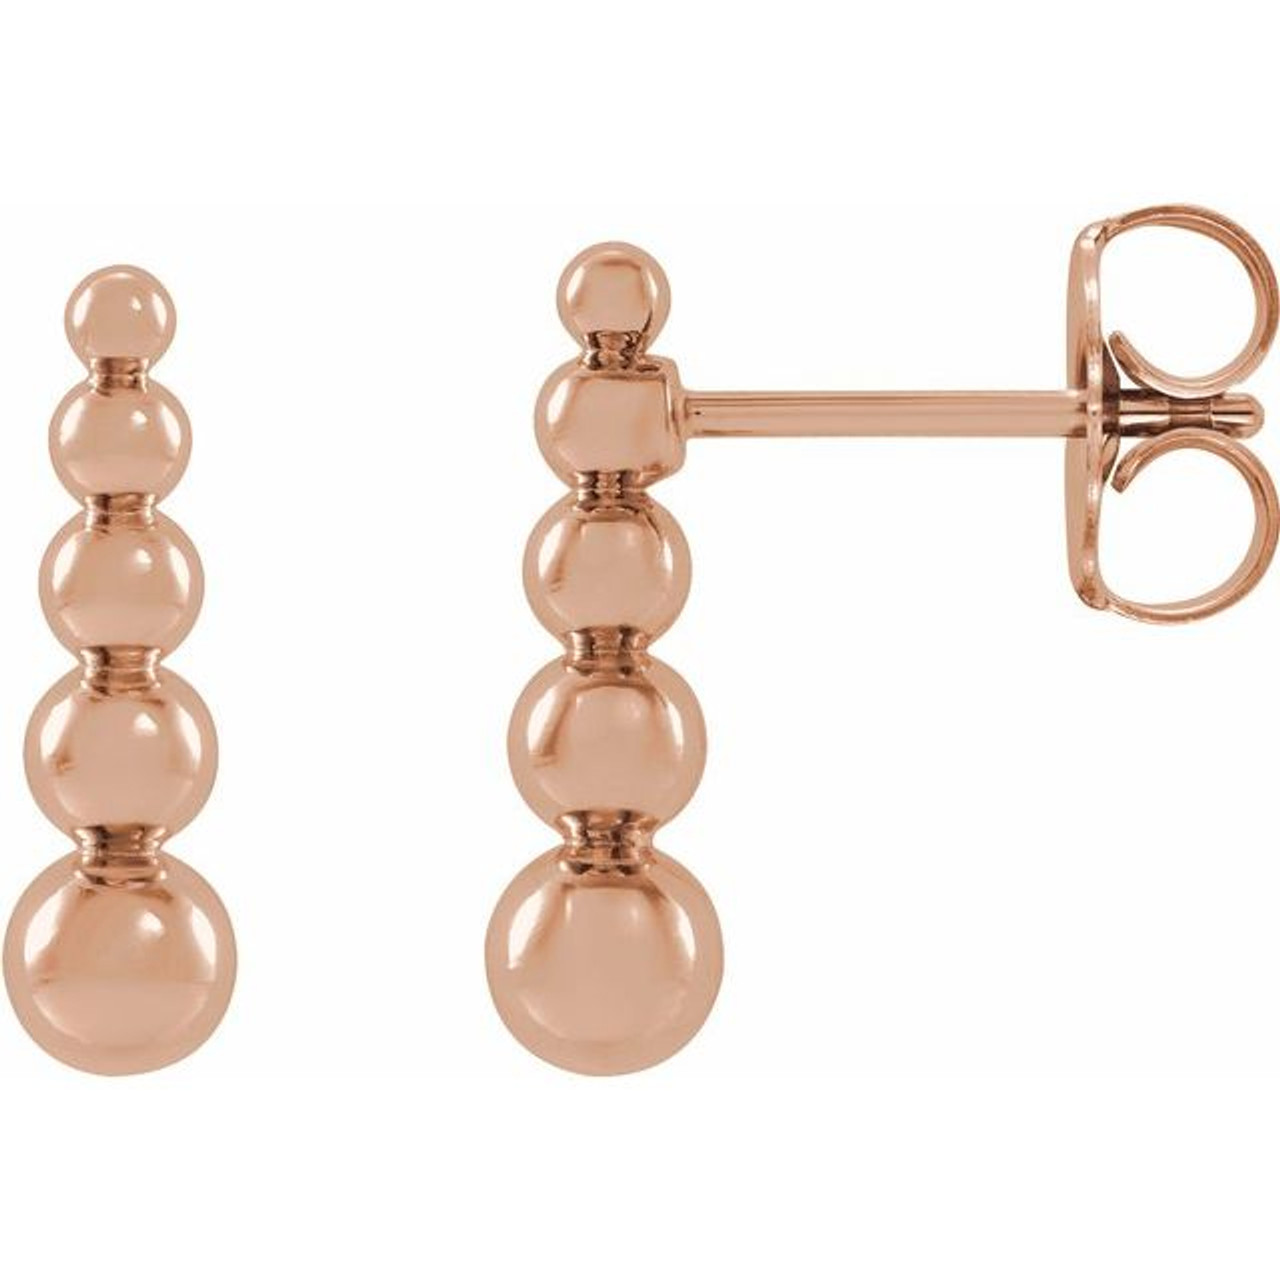 Natural Pink Freshwater Pearl Drop Earrings in 14k Rose Gold by Lali -  Nelson Coleman Jewelers